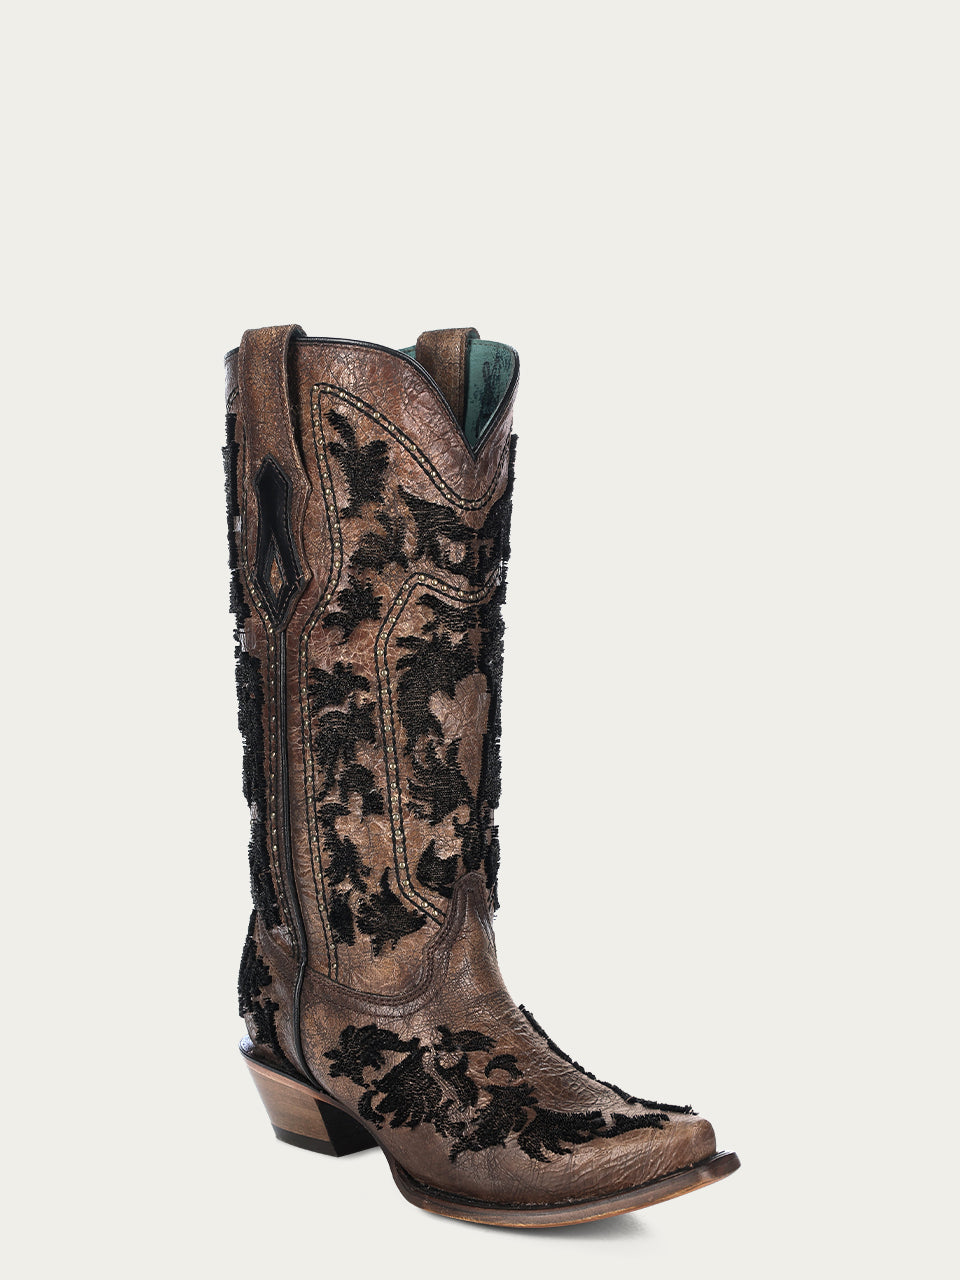 C4132 - WOMEN'S COGNAC 3D BRISTLE EMBROIDERY WITH STRAP AND ZIPPER CRACKLED GOLD SNIP TOE COWBOY BOOT